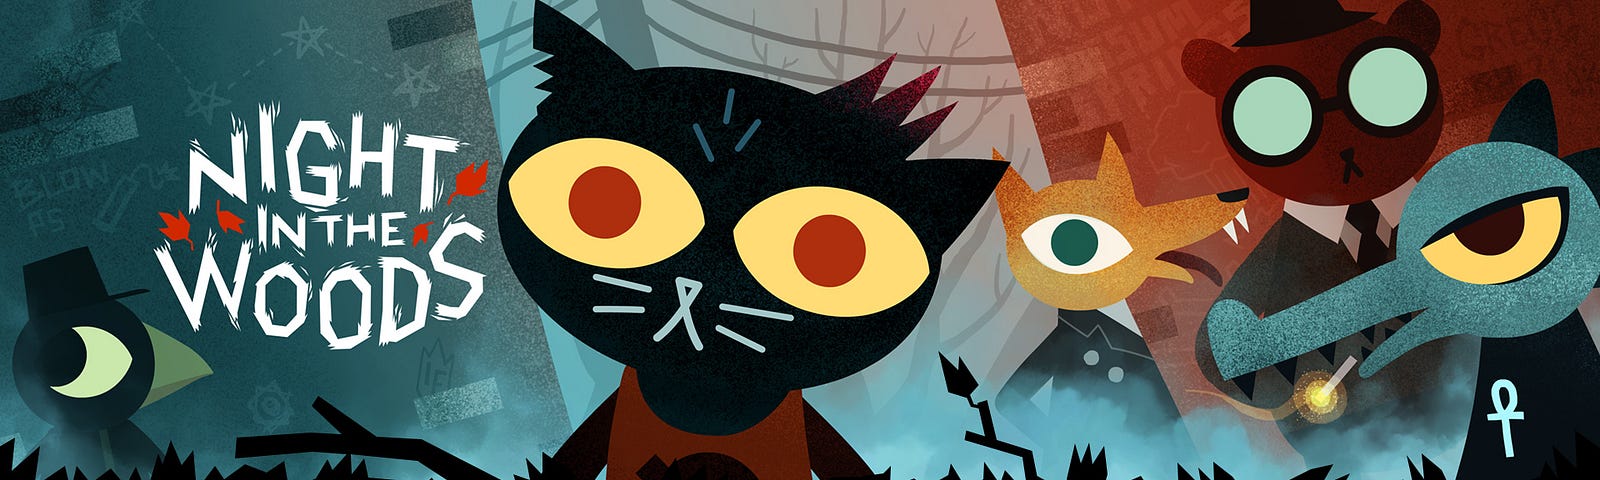 Night in the woods soundtrack download free. full